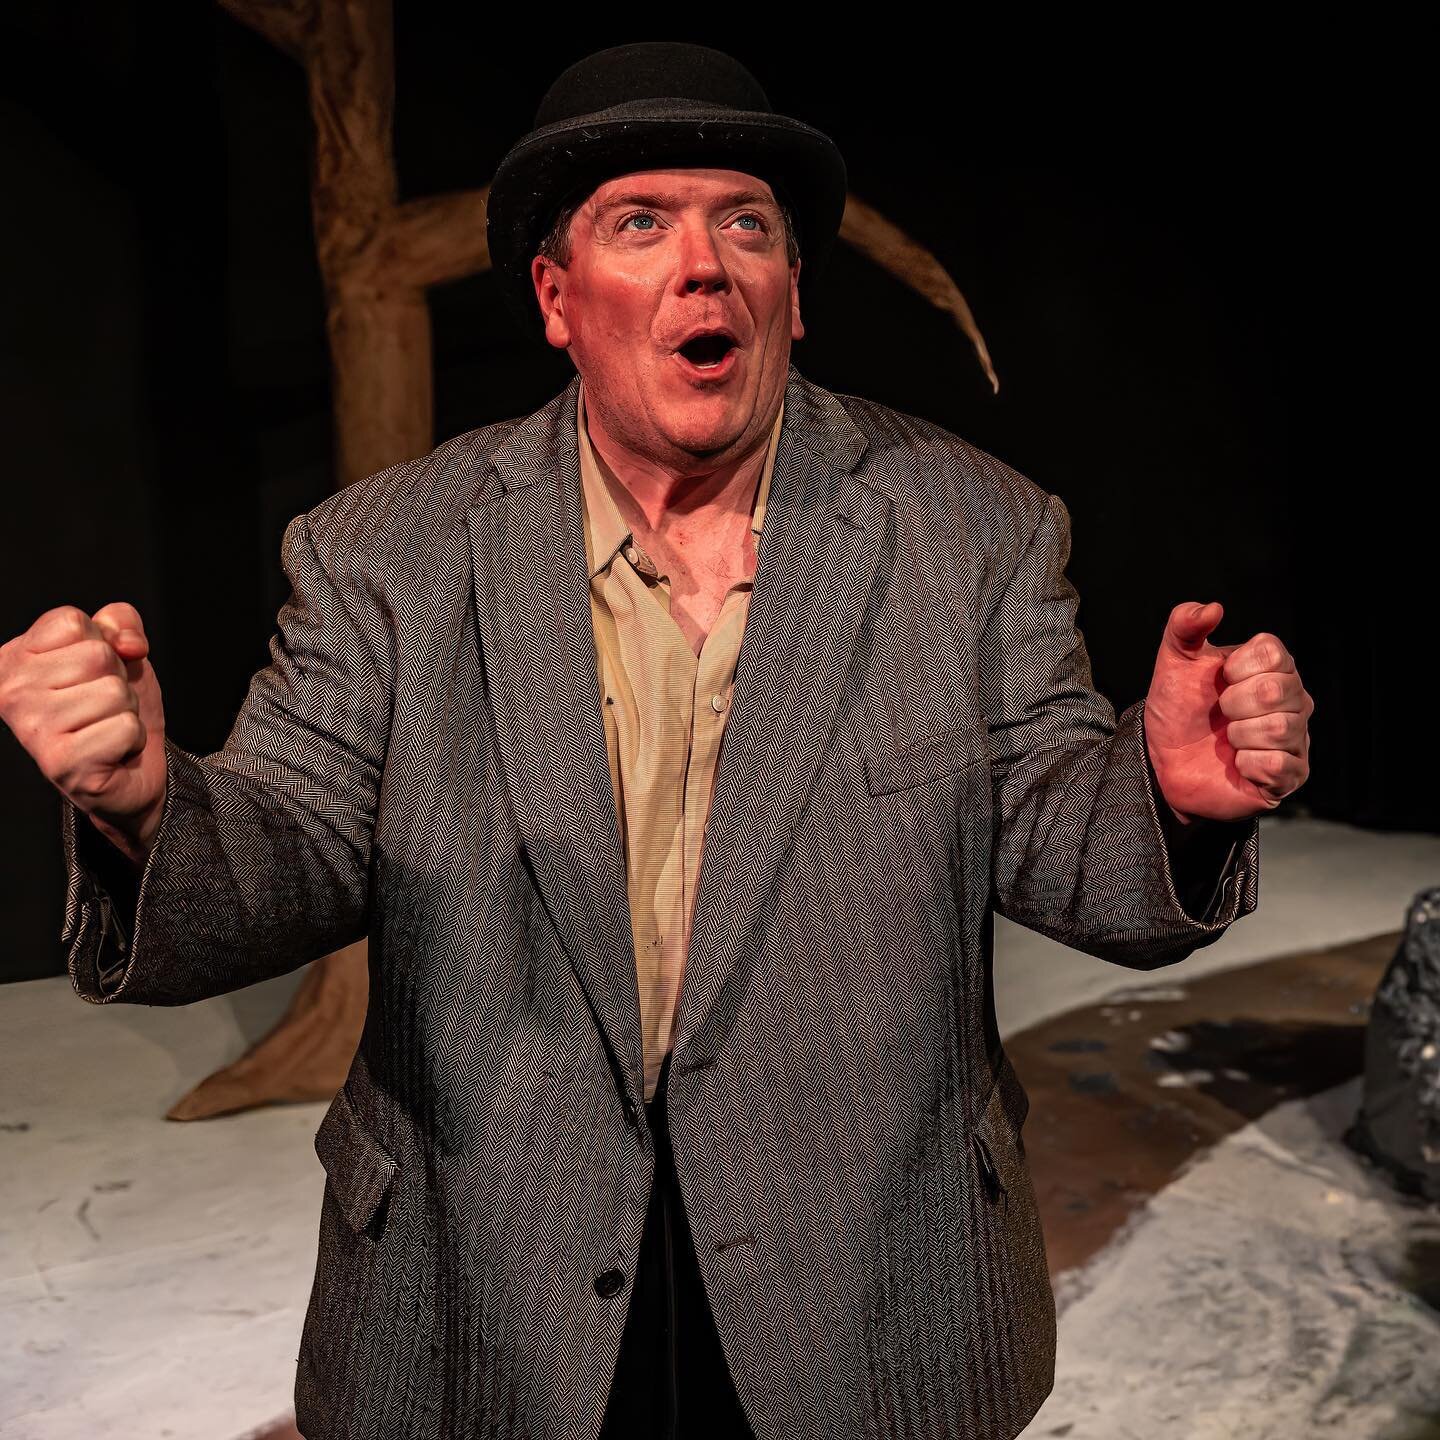 Today is the final performance of Waiting for Godot by Samuel Beckett! You can&rsquo;t wait any longer on this classic piece of theatre. Come on down to BFT this Sunday and see what all the fuss is about! Get your tickets at  www.bftonline.org